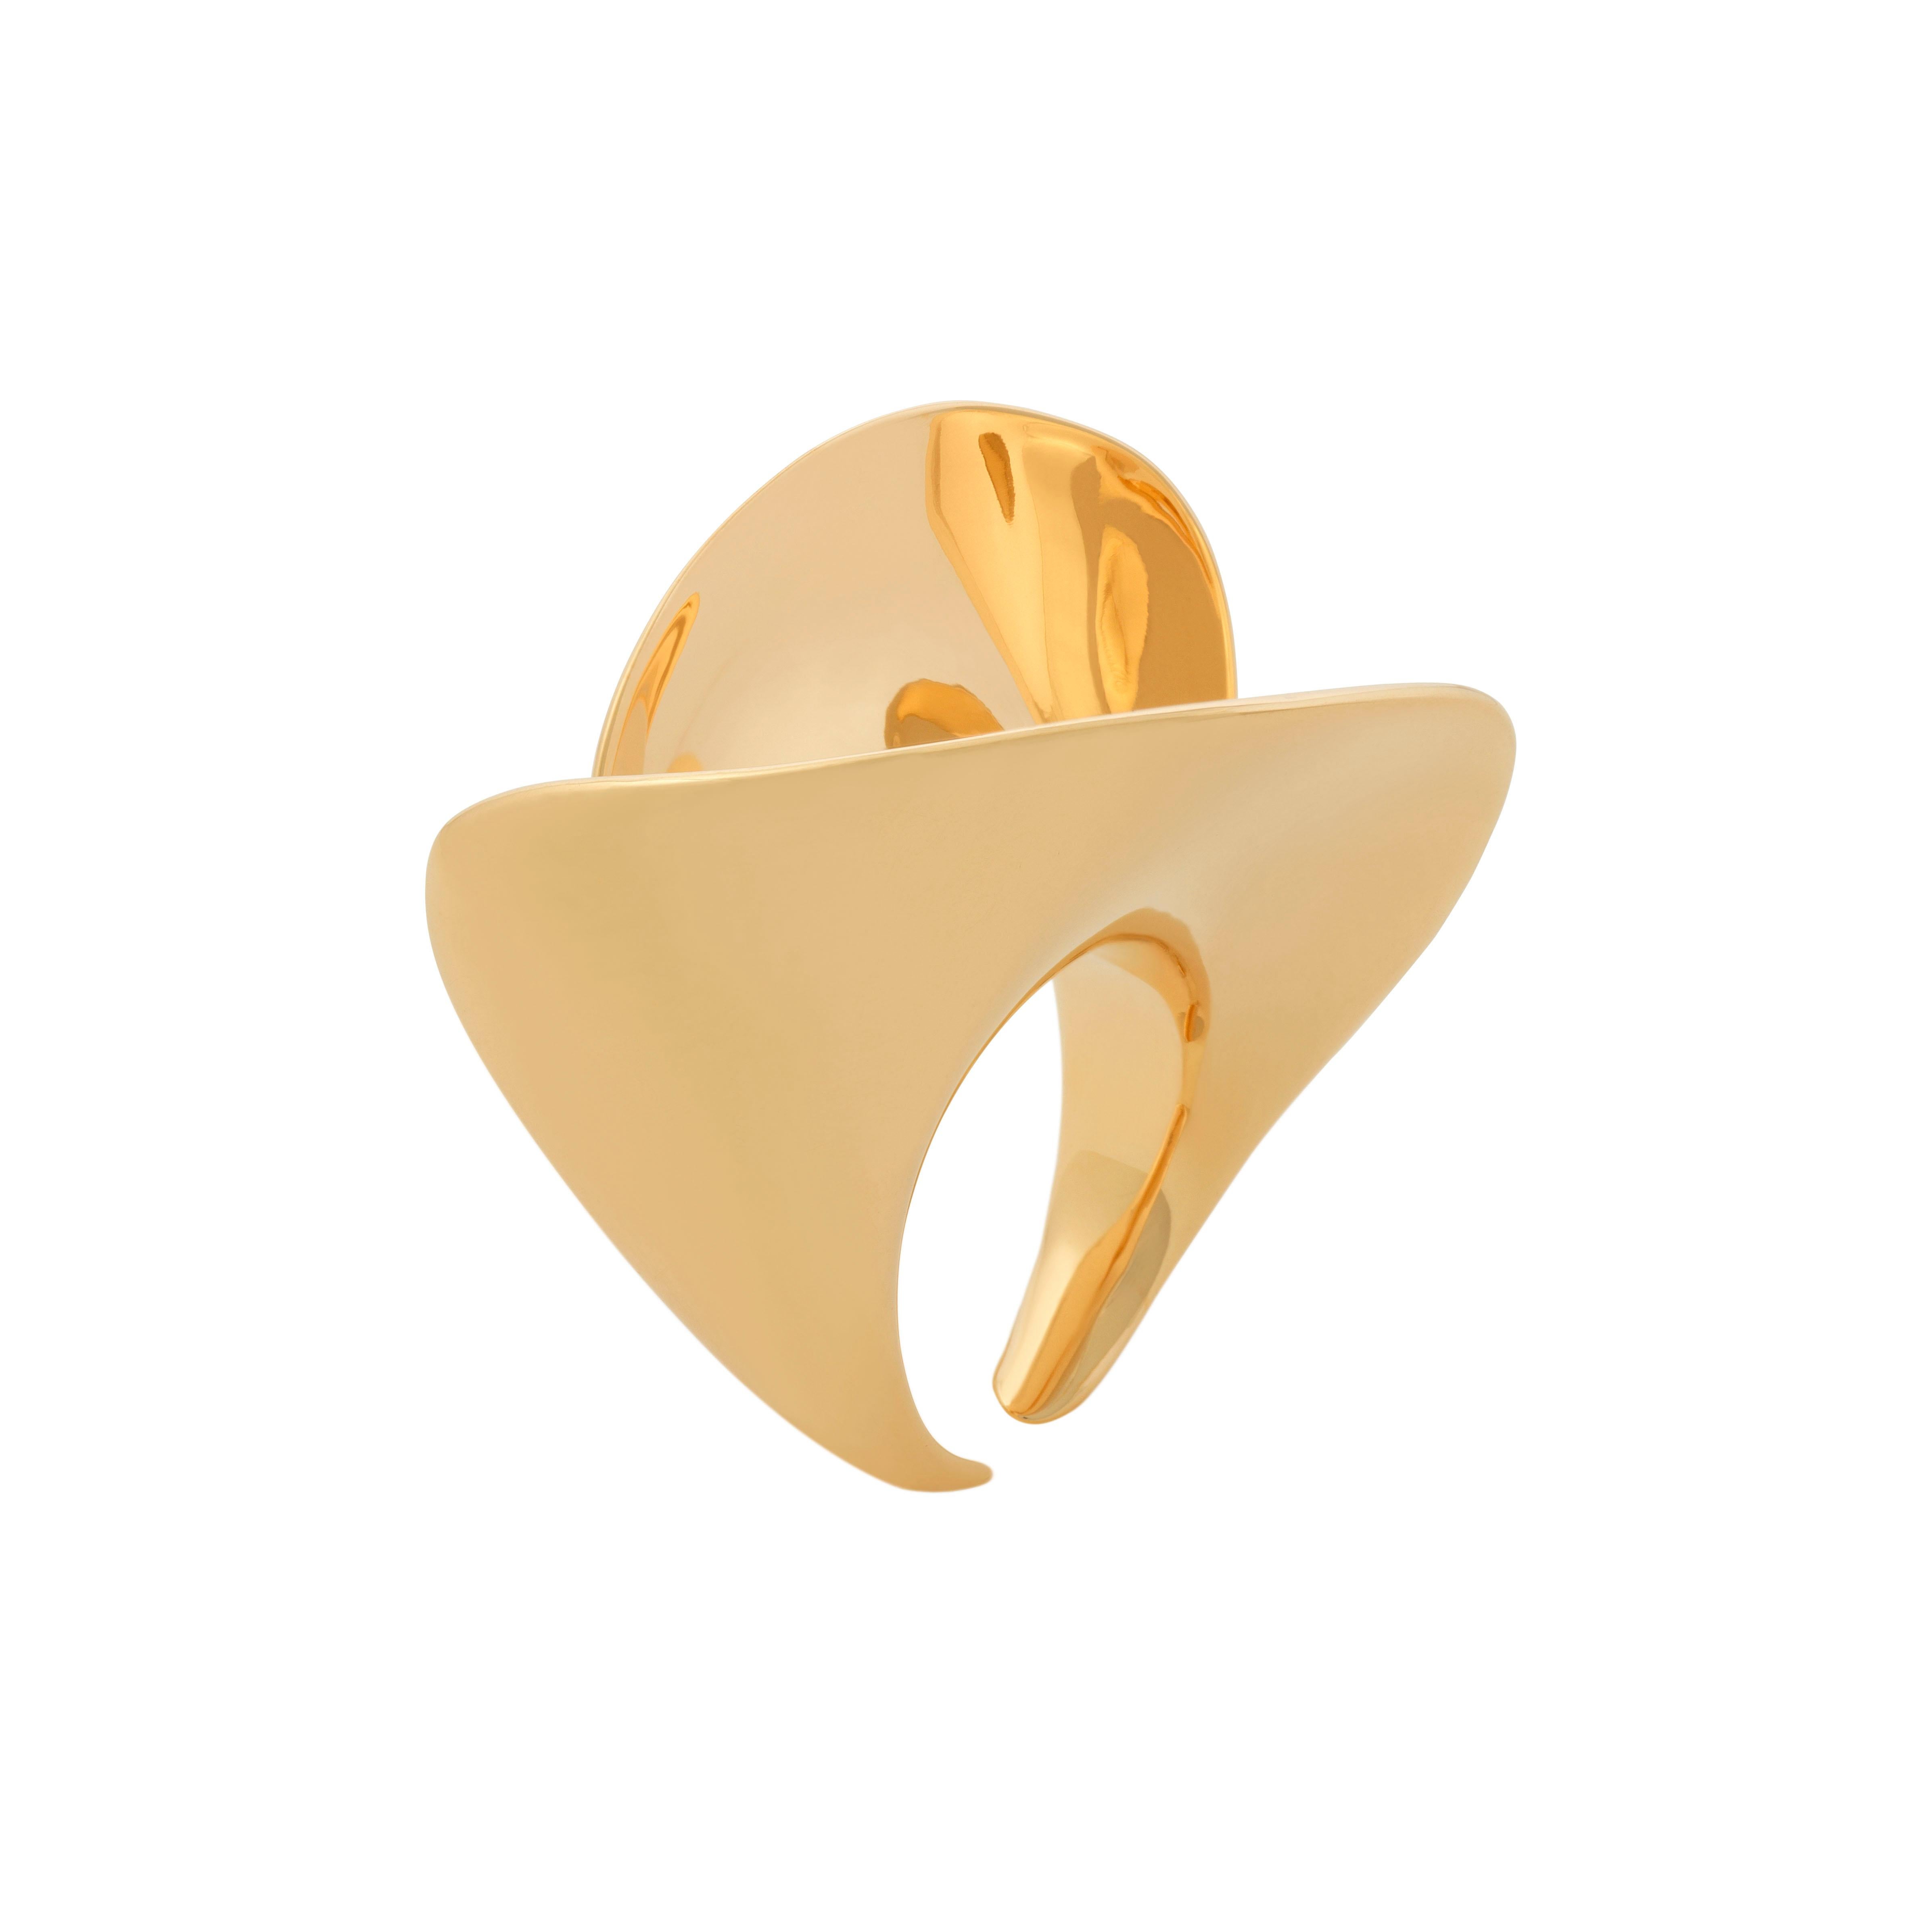 Nathalie Jean Contemporary Gold Limited Edition Sculpture Cocktail Ring For Sale 1